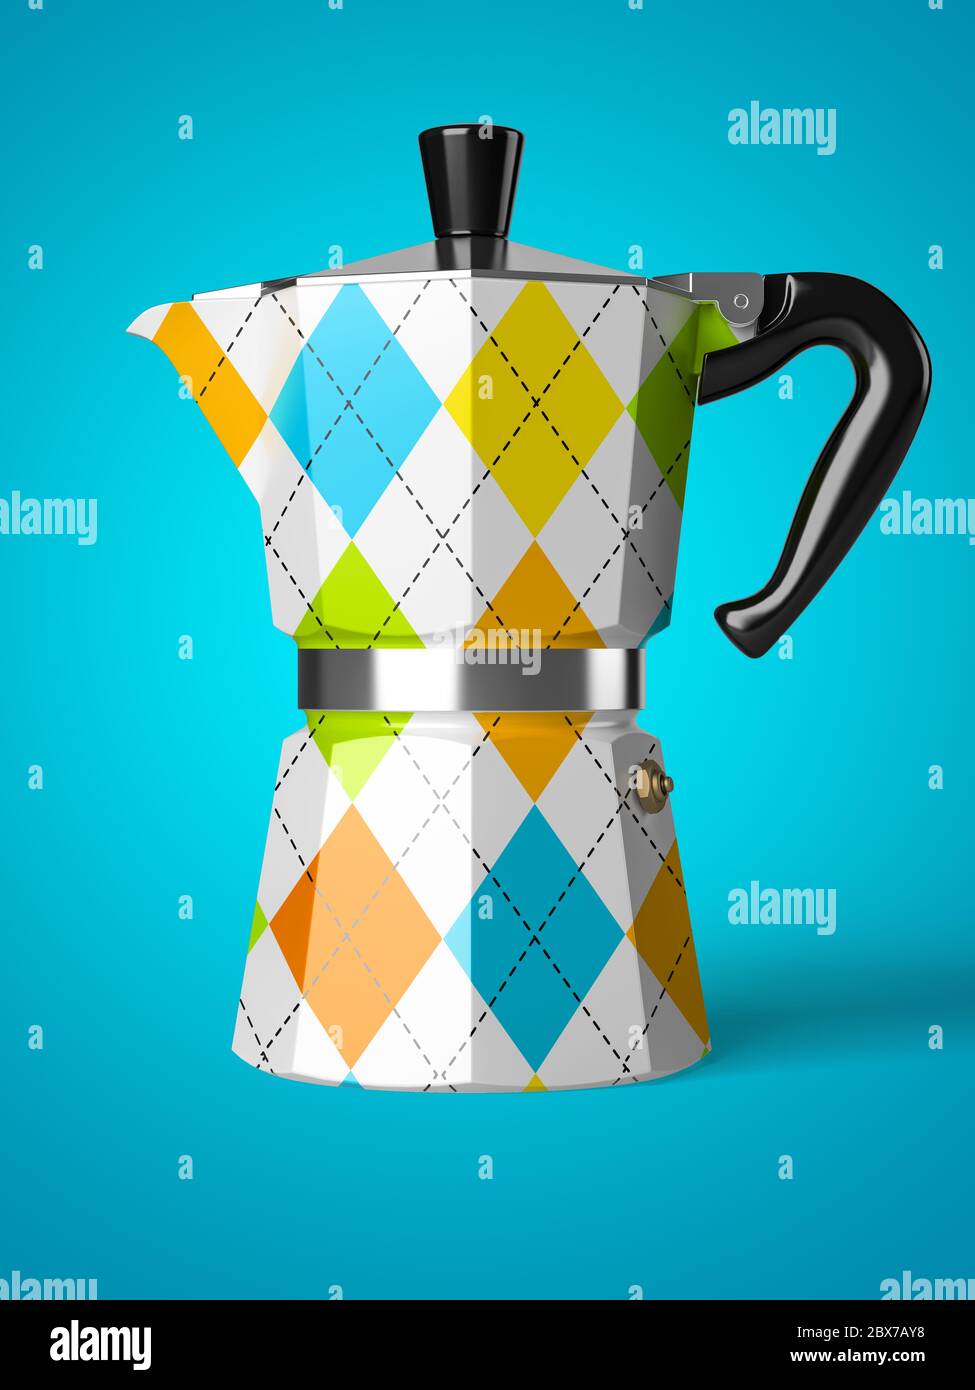 https://c8.alamy.com/comp/2BX7AY8/vintage-coffee-pot-isolated-on-a-background-3d-rendering-2BX7AY8.jpg